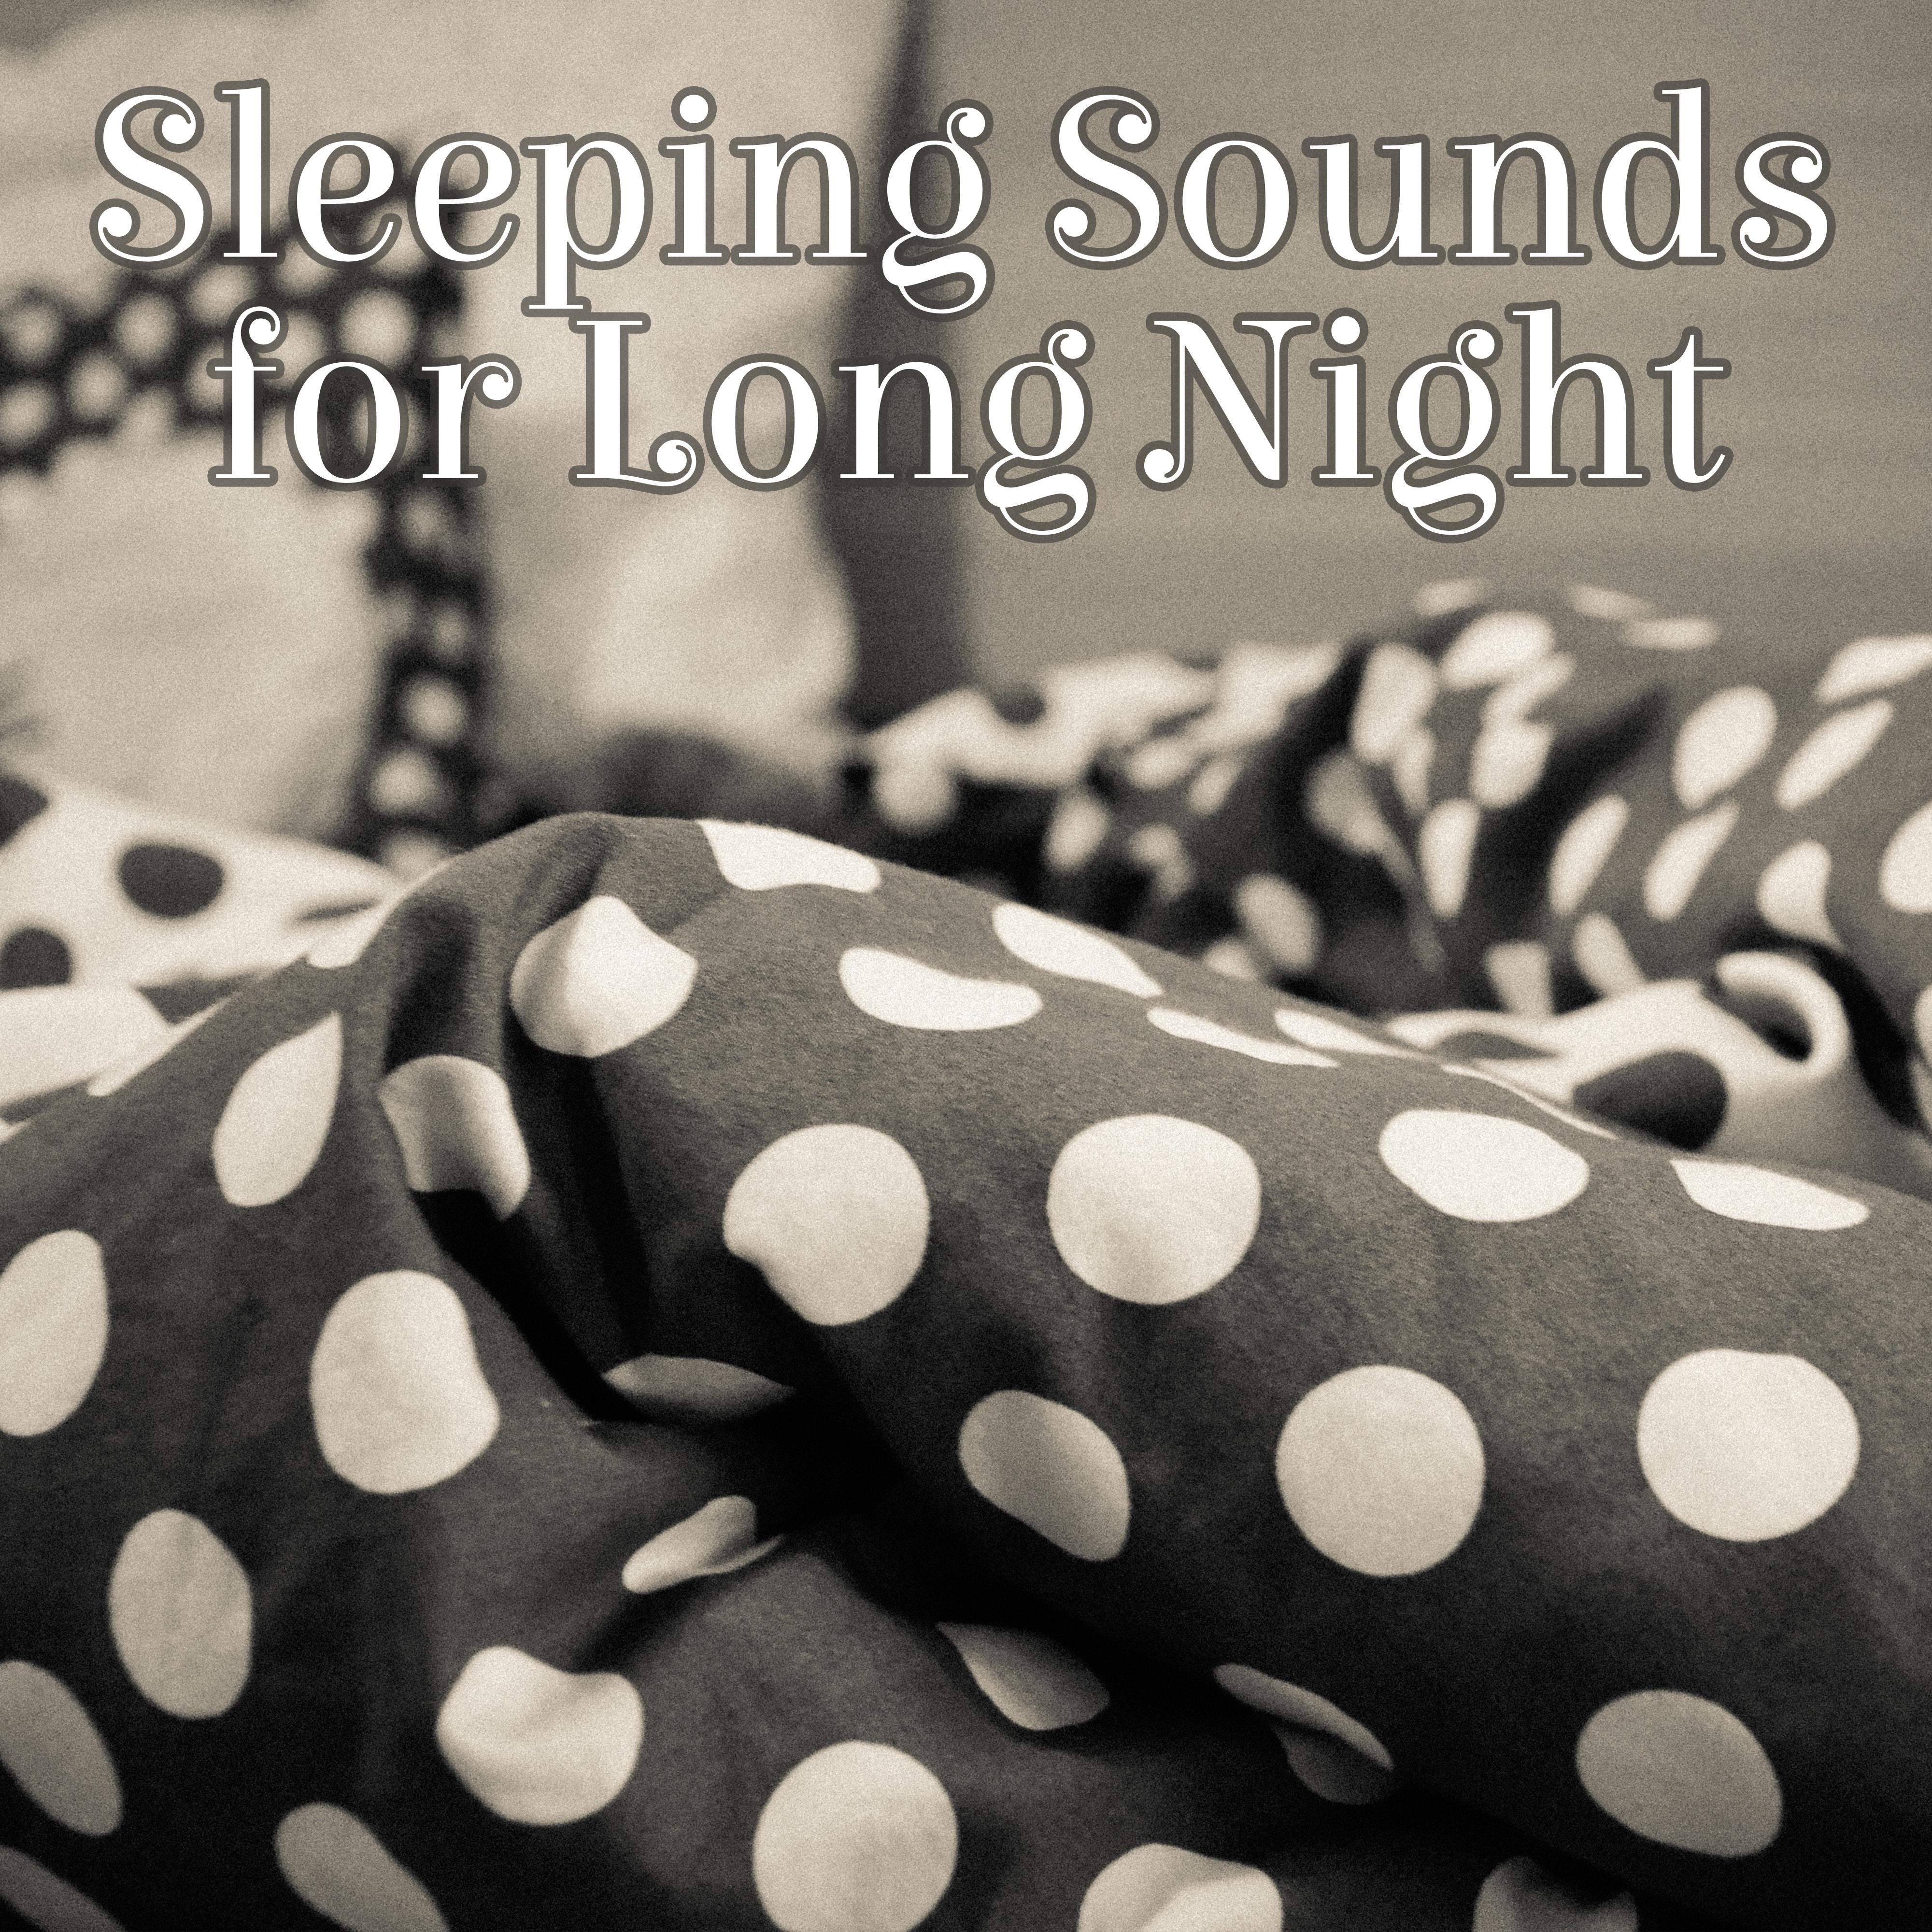 Sleeping Sounds for Long Night  Calm Music to Relax, Sweet Dreams, Quiet Night, Sleep Well